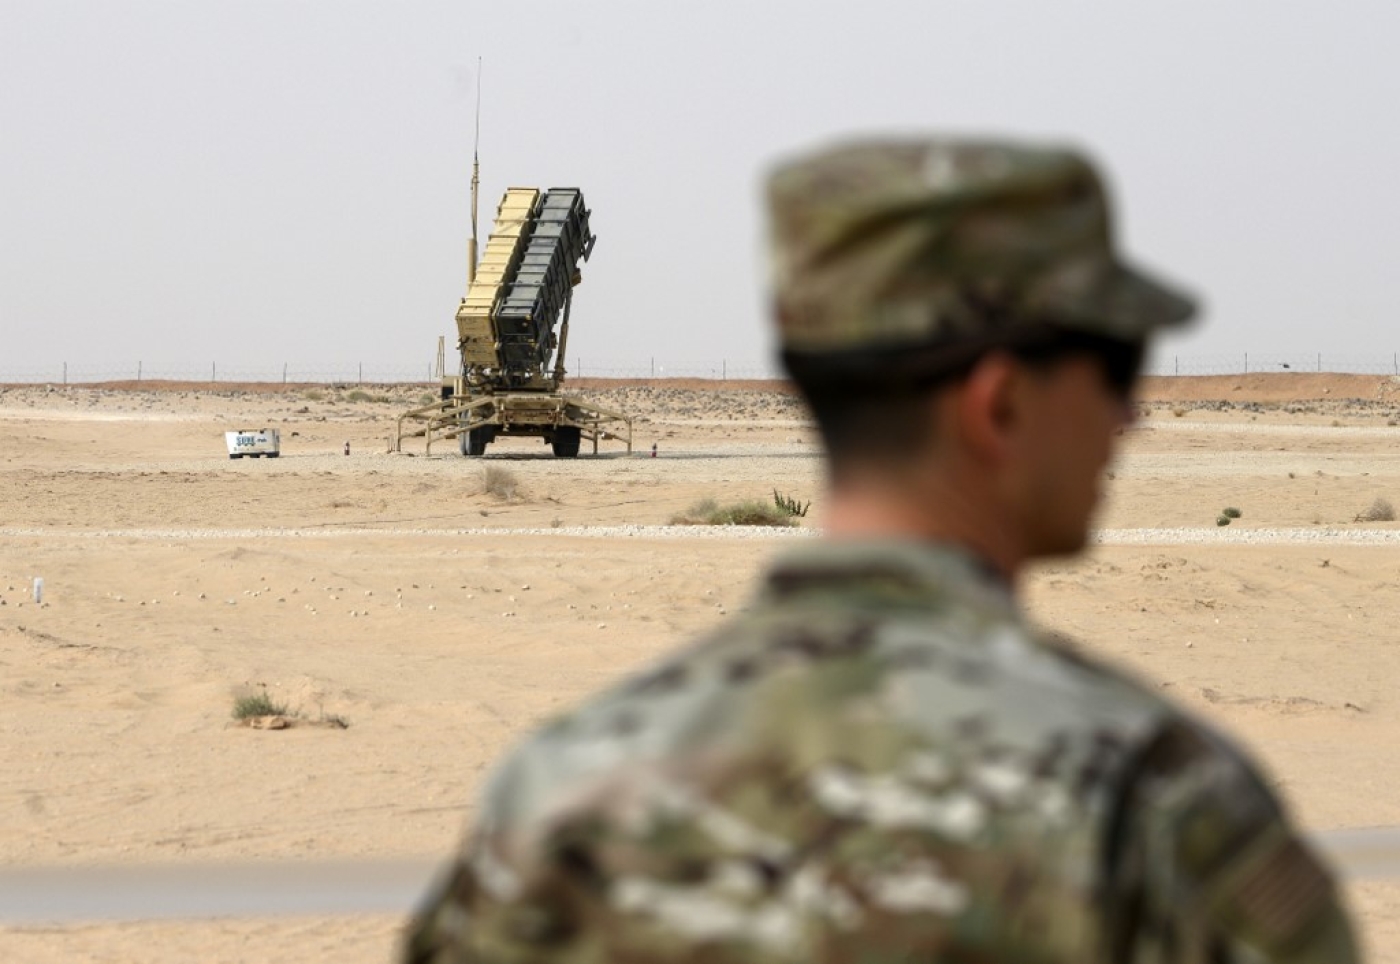 A US Air Force member looks on near a Patriot missile battery at the Prince Sultan air base in al-Kharj, Saudi Arabia on 20 February 2020.